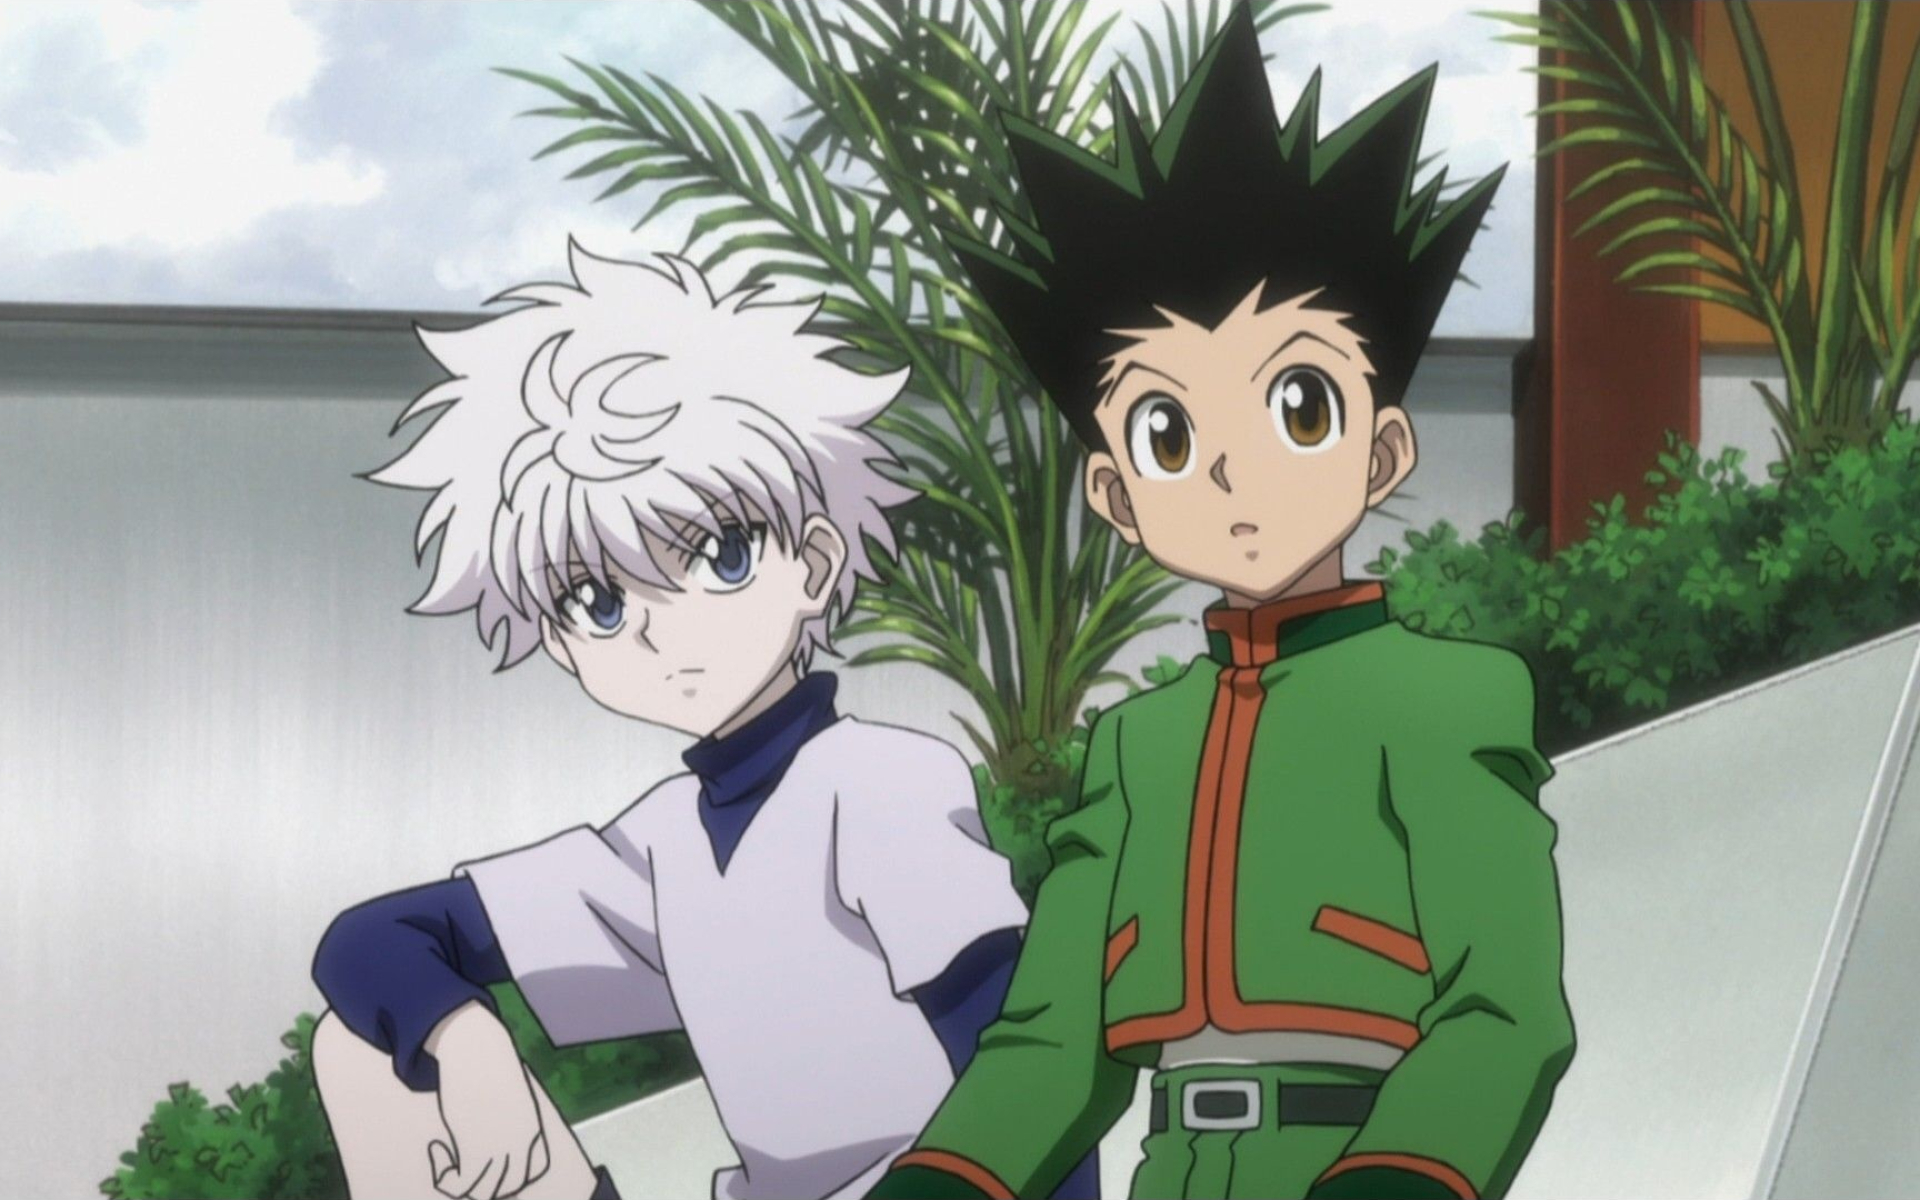 Gon and Killua: A 62-episode anime television series produced by Nippon Animation and directed by Kazuhiro Furuhashi. 1920x1200 HD Wallpaper.